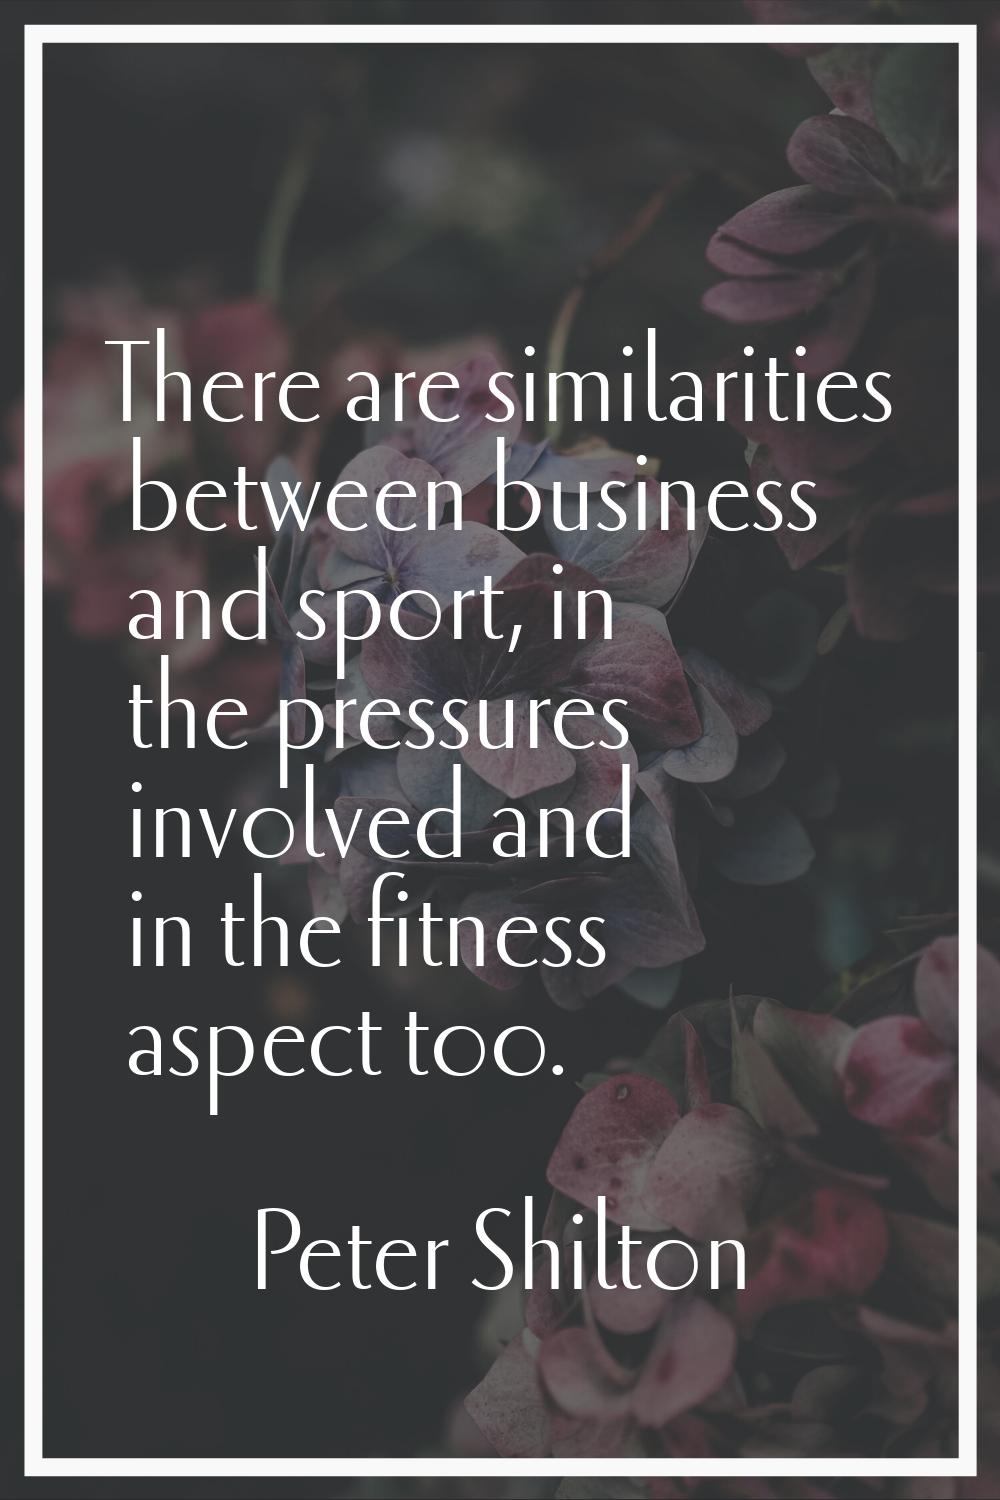 There are similarities between business and sport, in the pressures involved and in the fitness asp